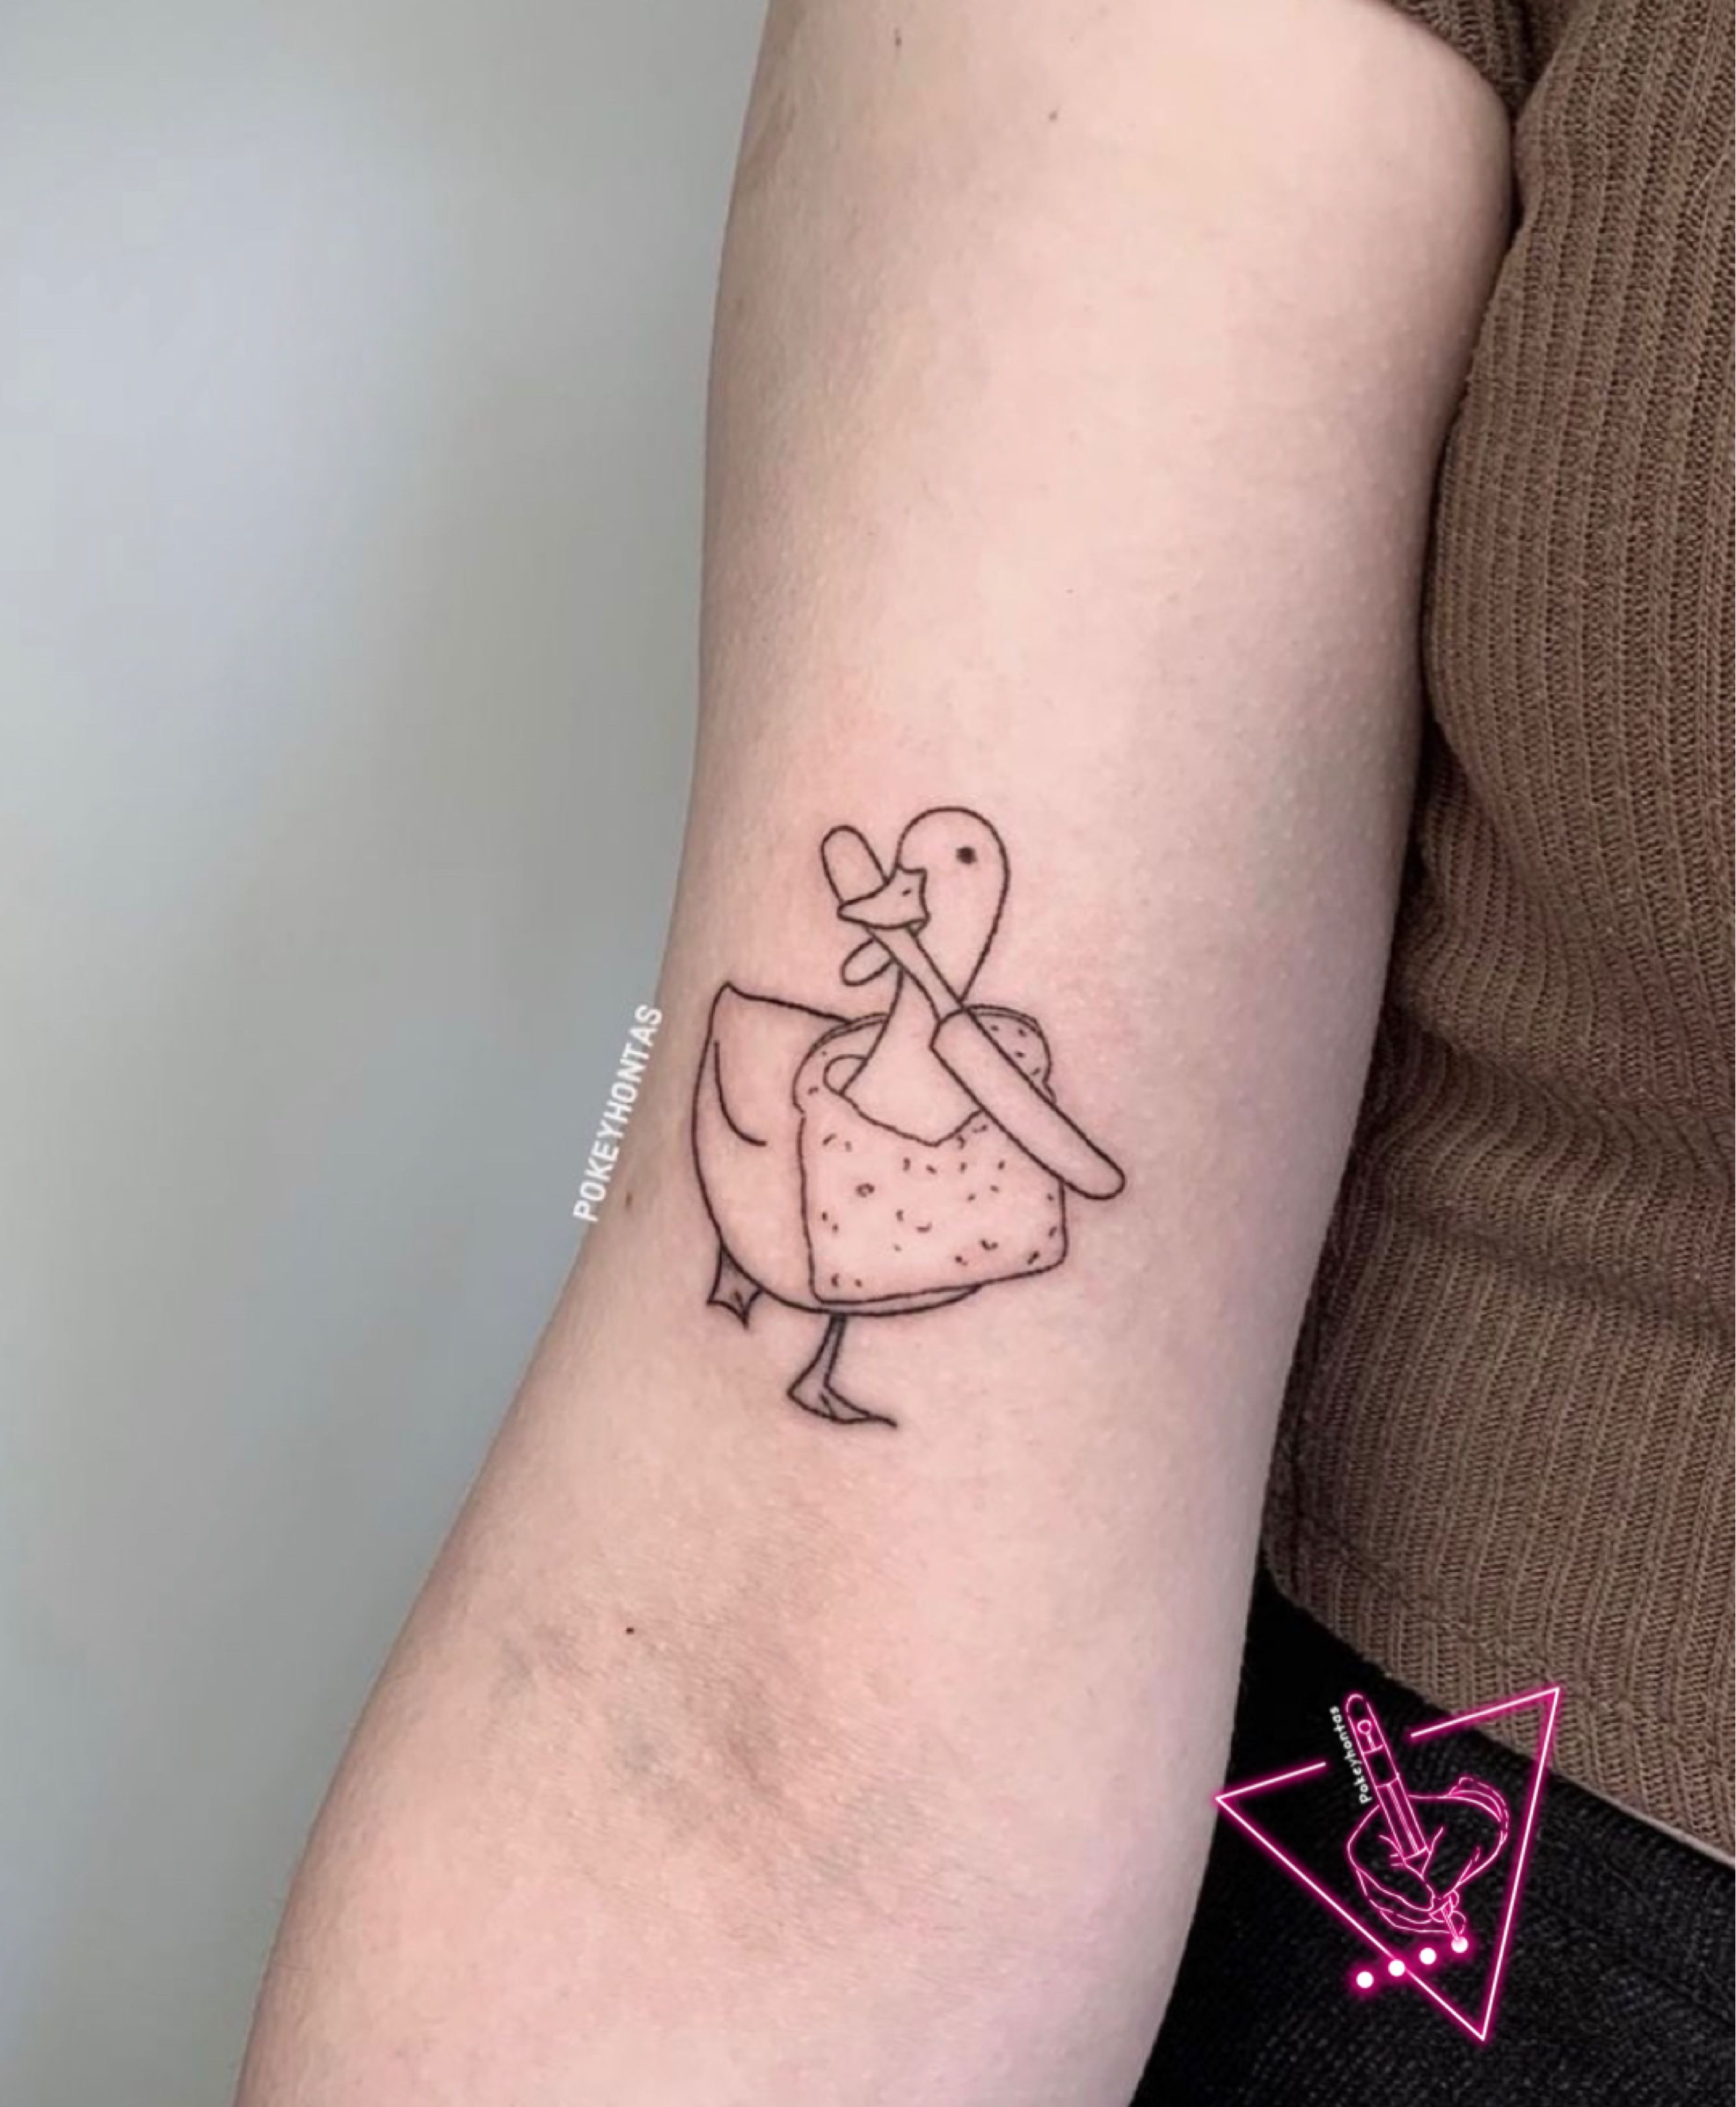 Simple Duck Tattoos That Will Make You Smile  Noon Line Art  Duck tattoos  Small tattoos Swan tattoo